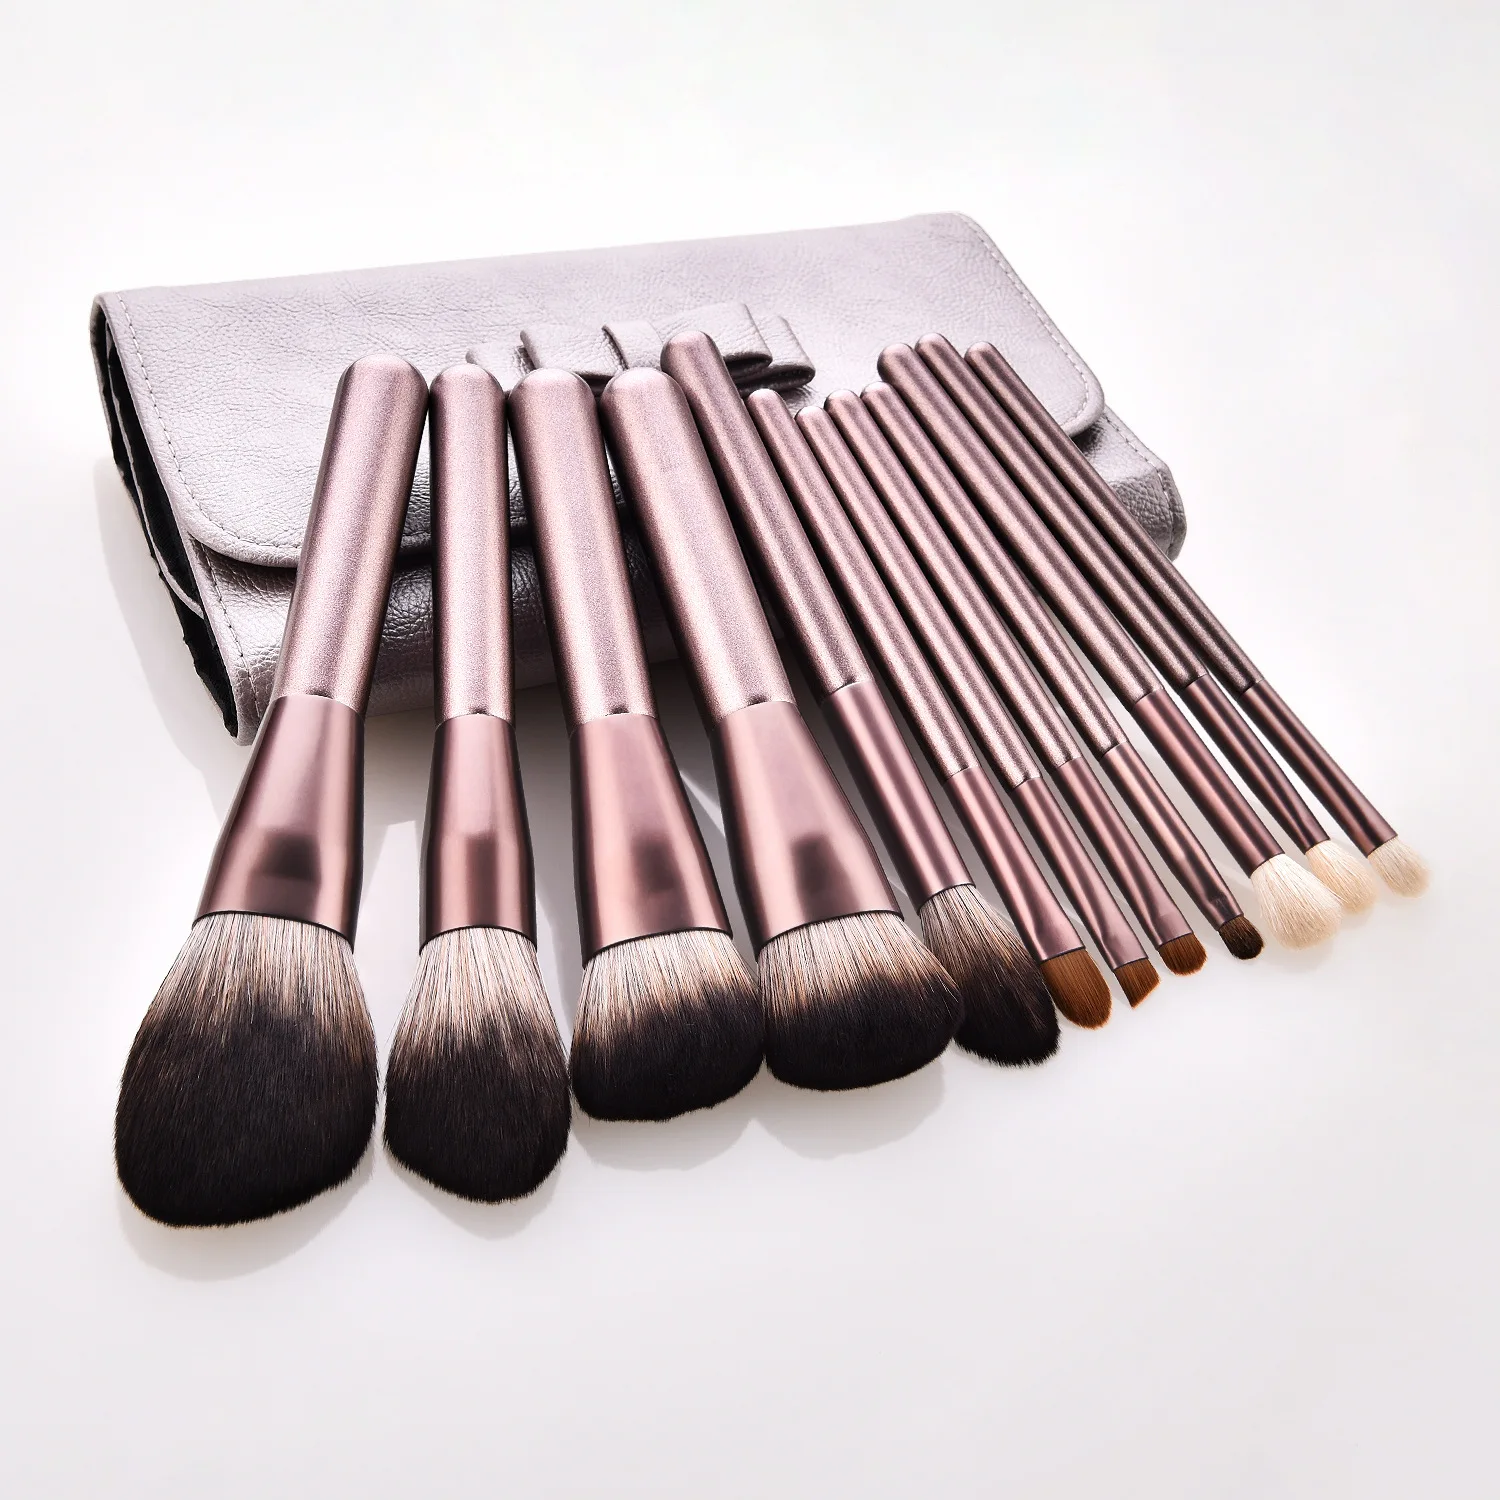 

Make up brushes 12pcs professional synthetic hair foundation powder blush cosmetic private label makeup brush sets with Pu Bag